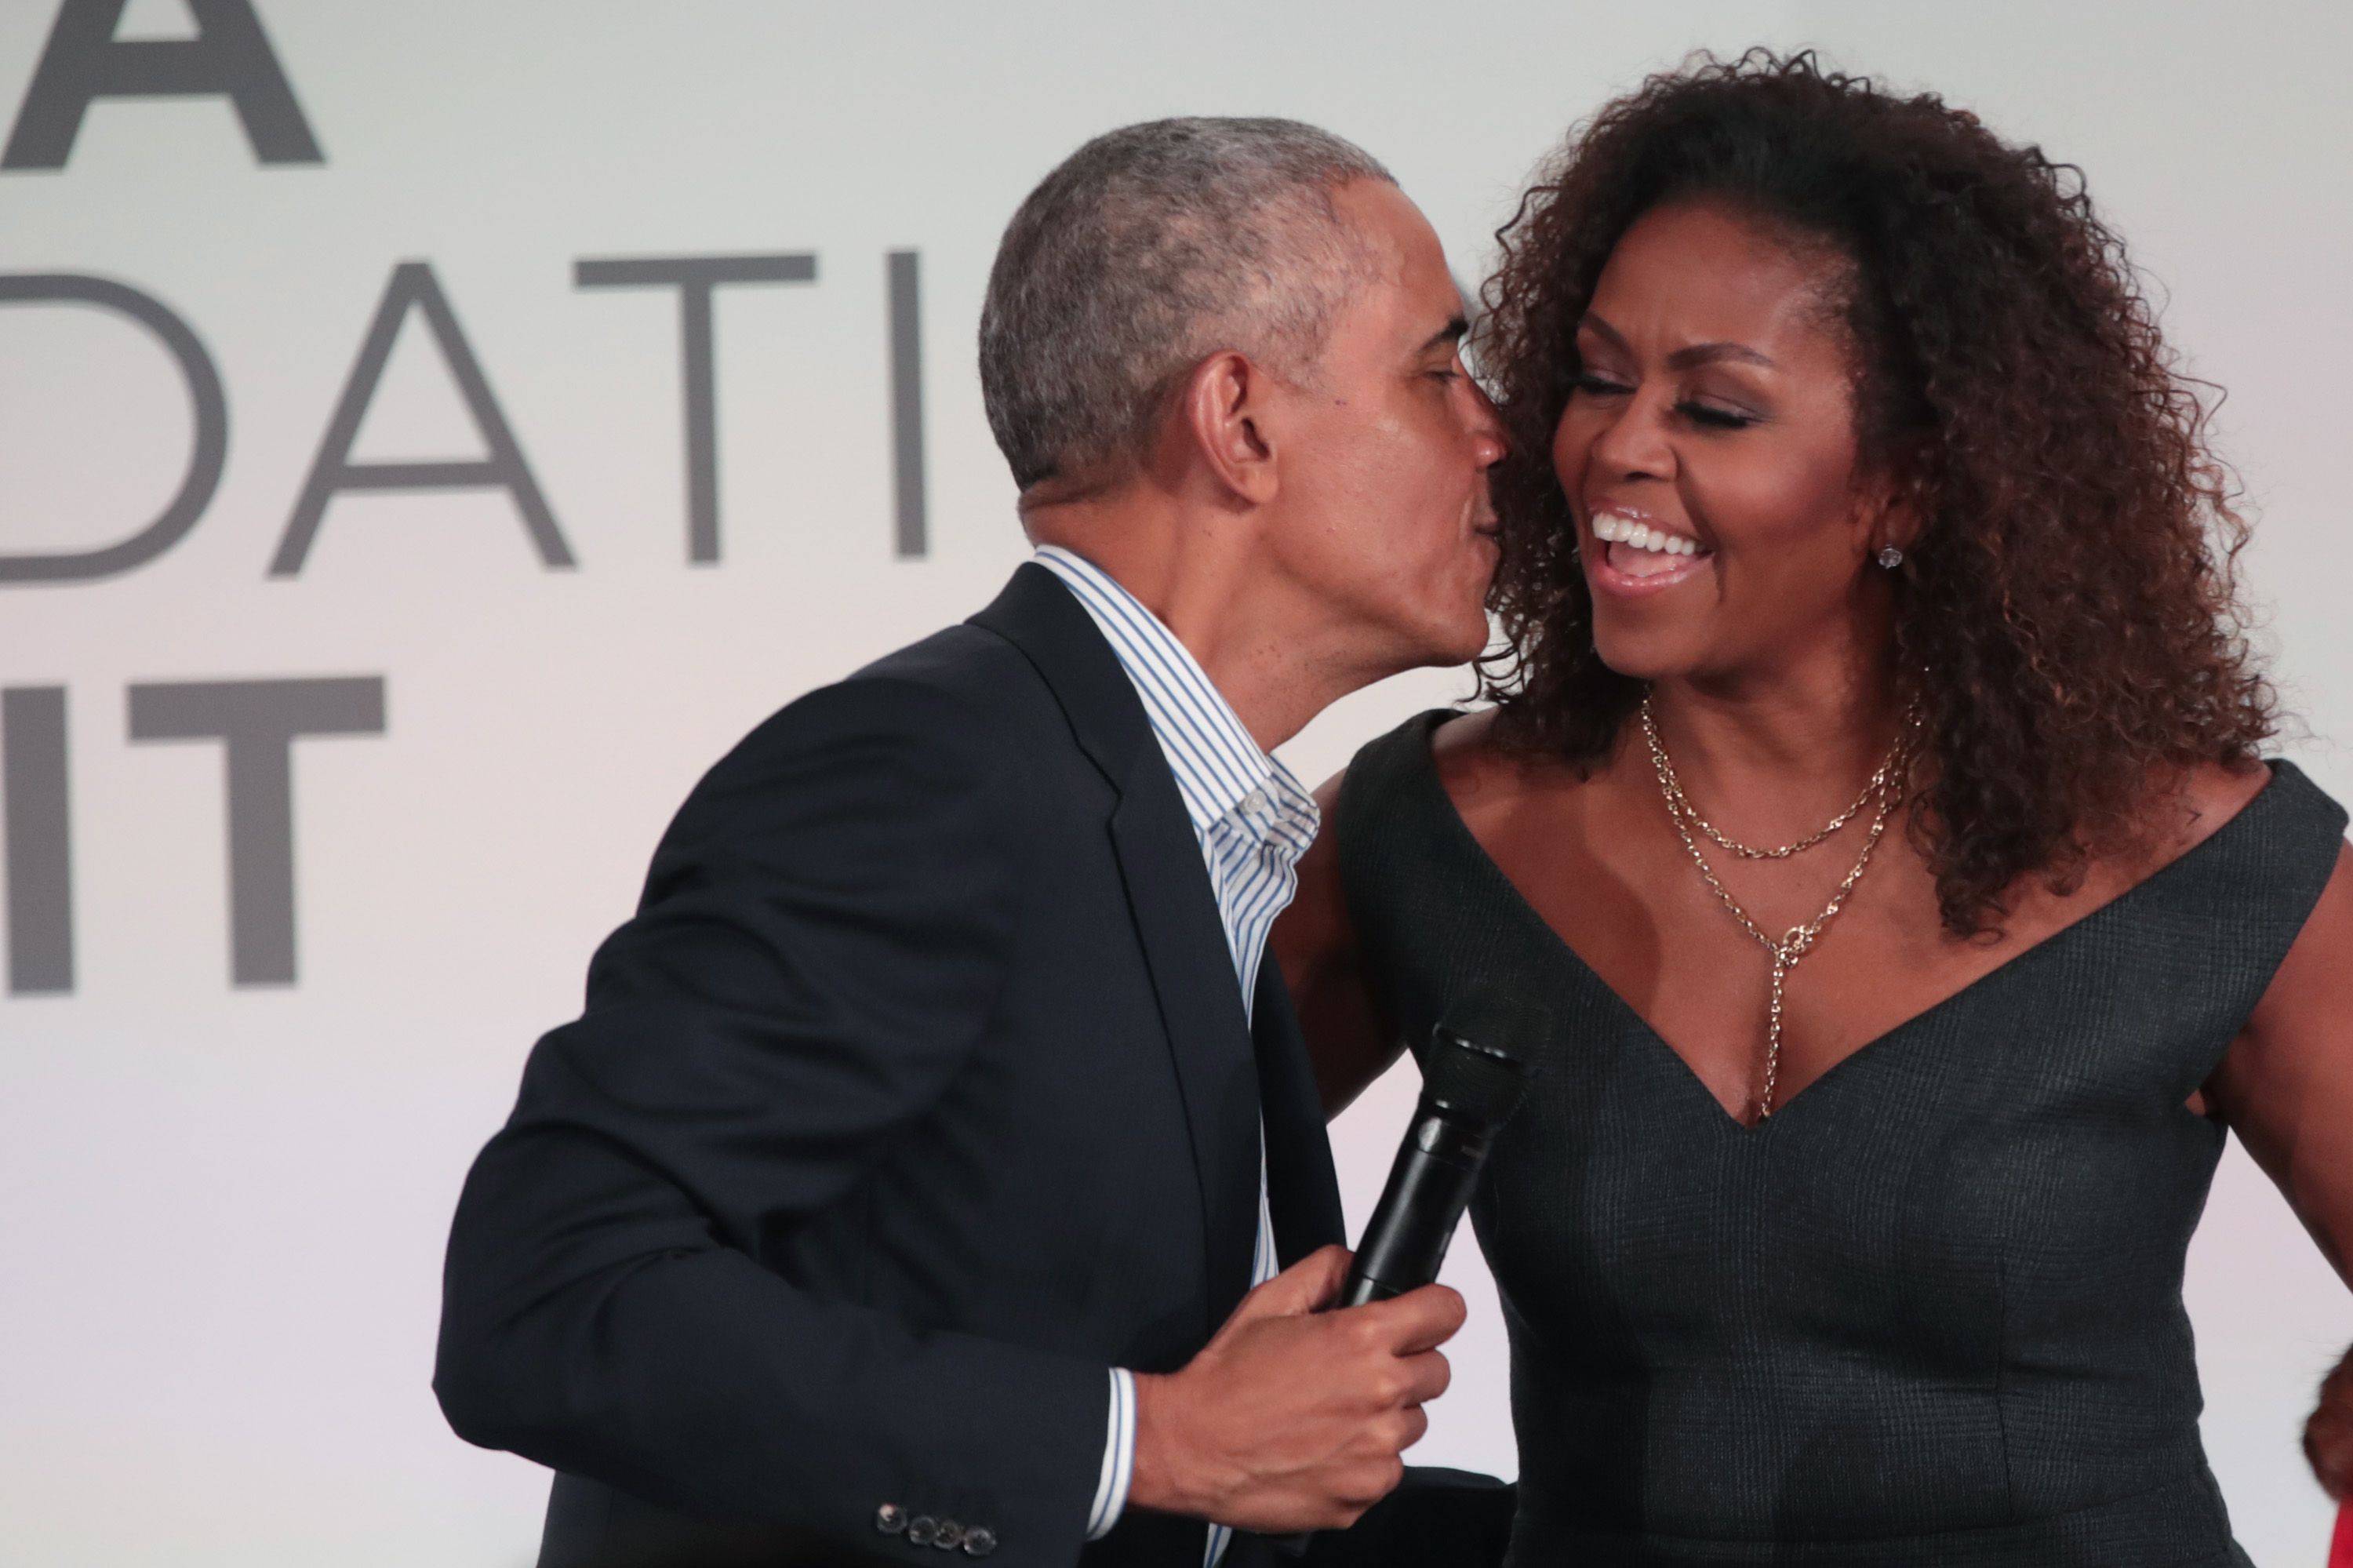 Barack Obama gives his wife Michelle a kiss as they close the Obama Foundation Summit together on the campus of the Illinois Institute of Technology on October 29, 2019. | Photo: Getty Images